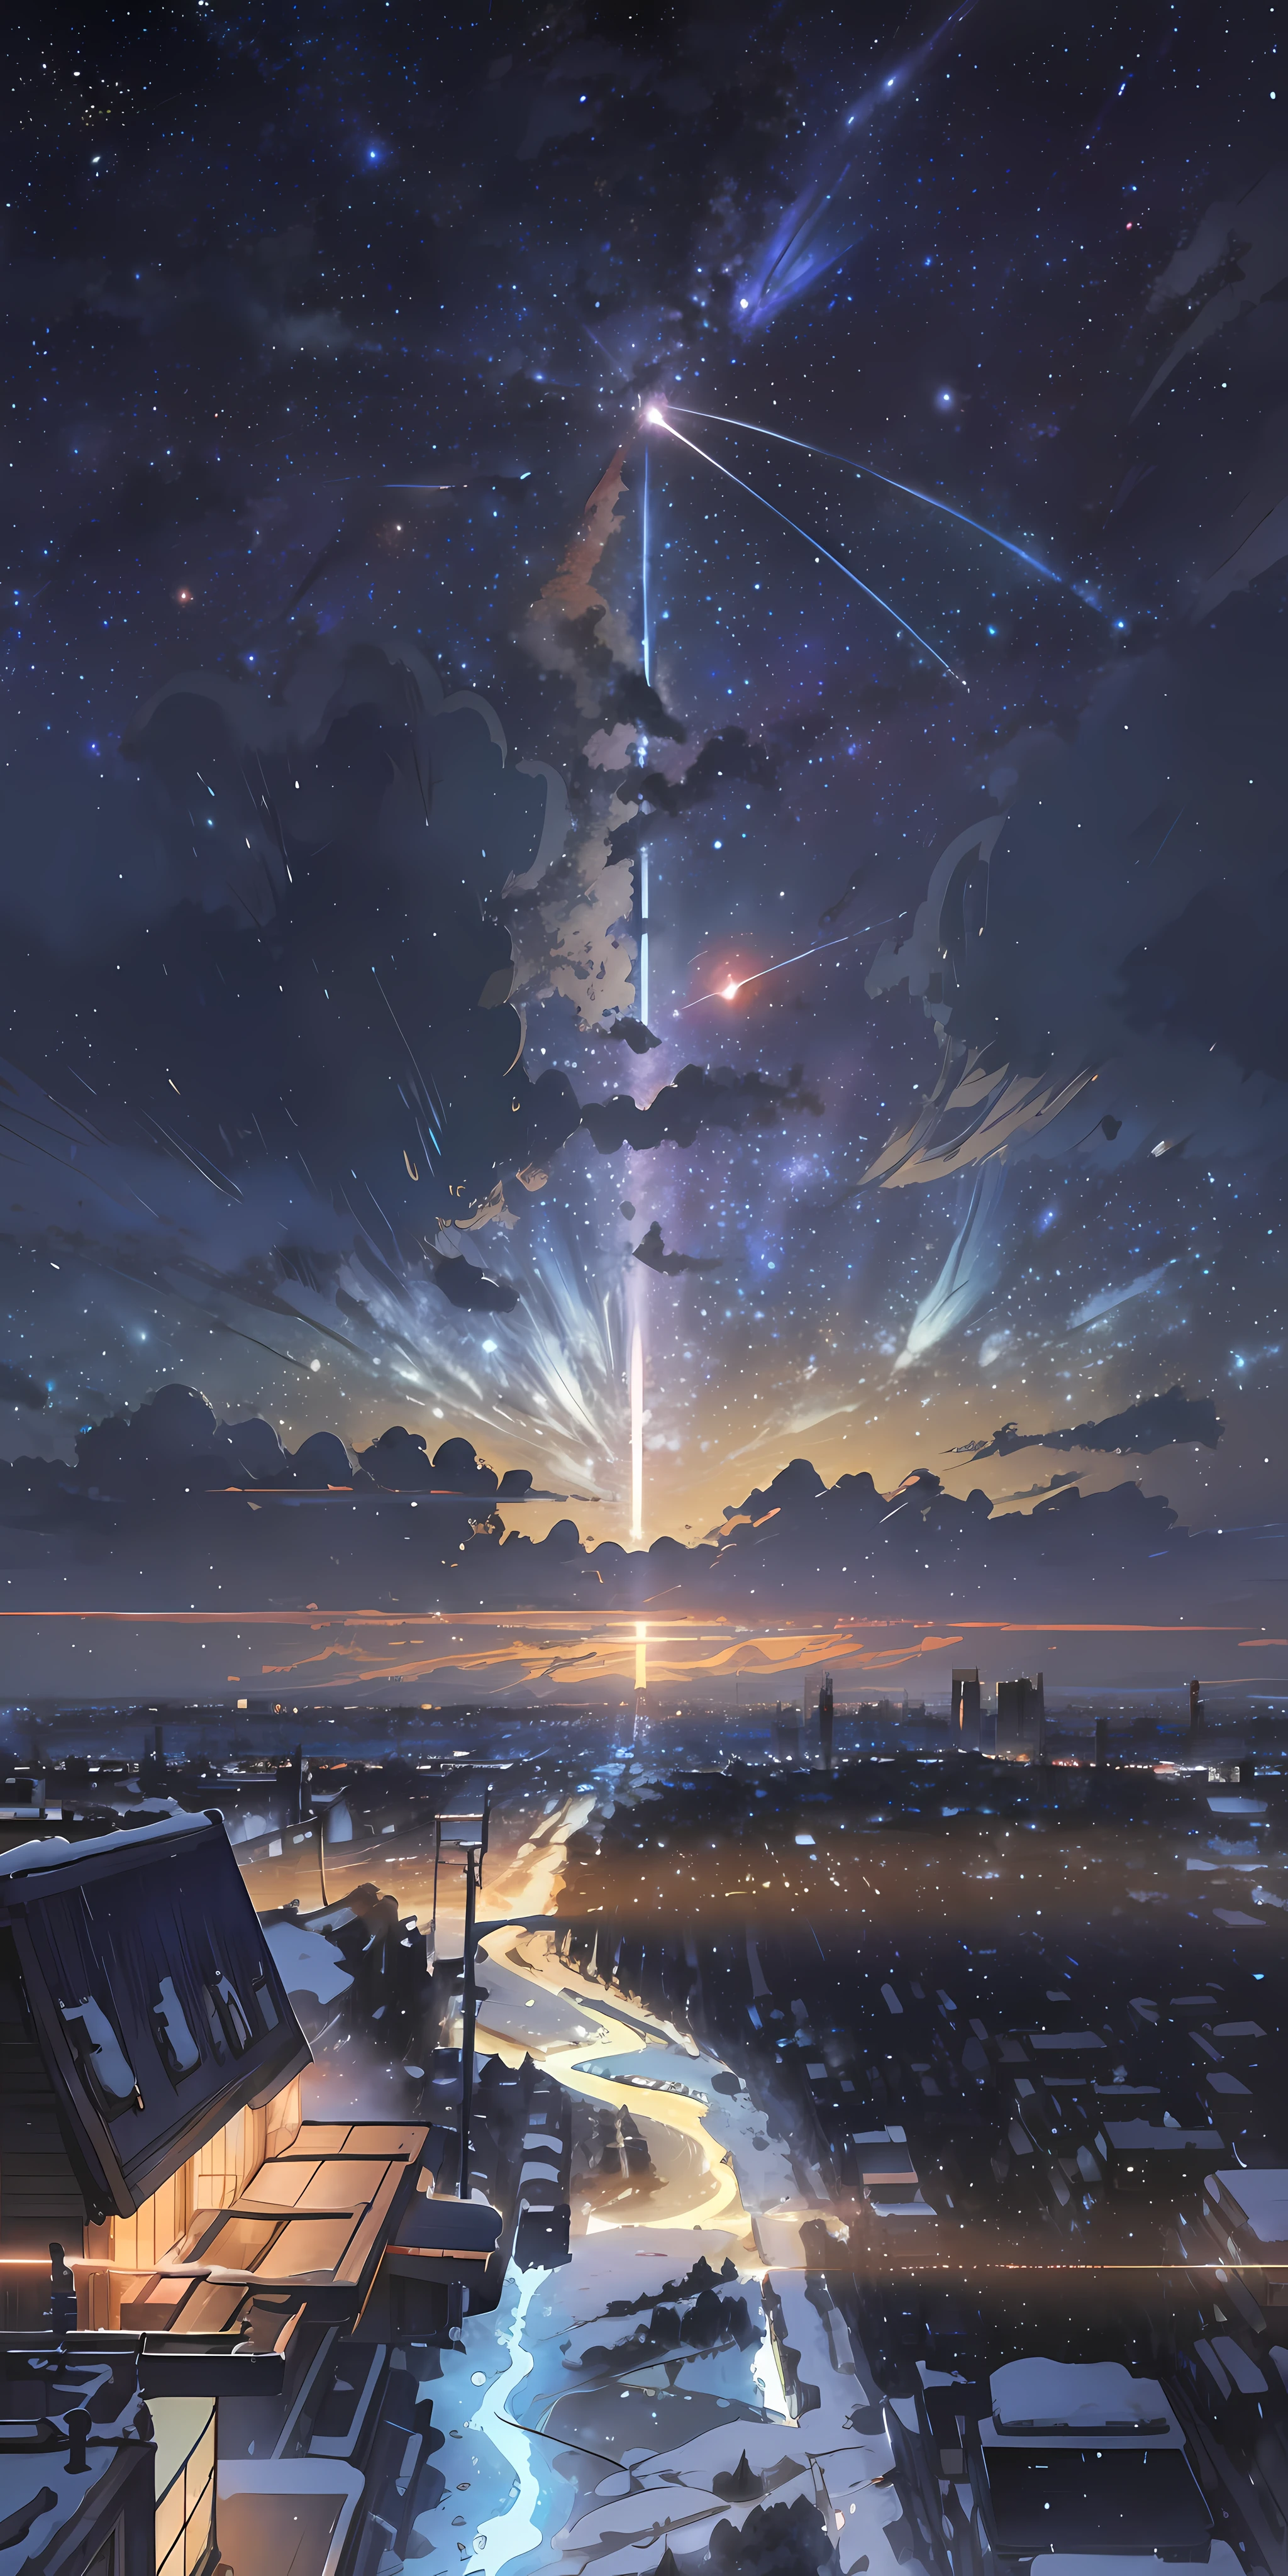 There is a train running along the tracks in the snow, Makoto Shinkai&#39;s concept art, tumblr, magic realism, beautiful anime scenes, cosmic sky. by makoto shinkai, ( ( makoto shinkai ) ), anime background art, anime backgrounds, Makoto Shinkai&#39;s style, anime movie backgrounds, galaxy express, no humans.